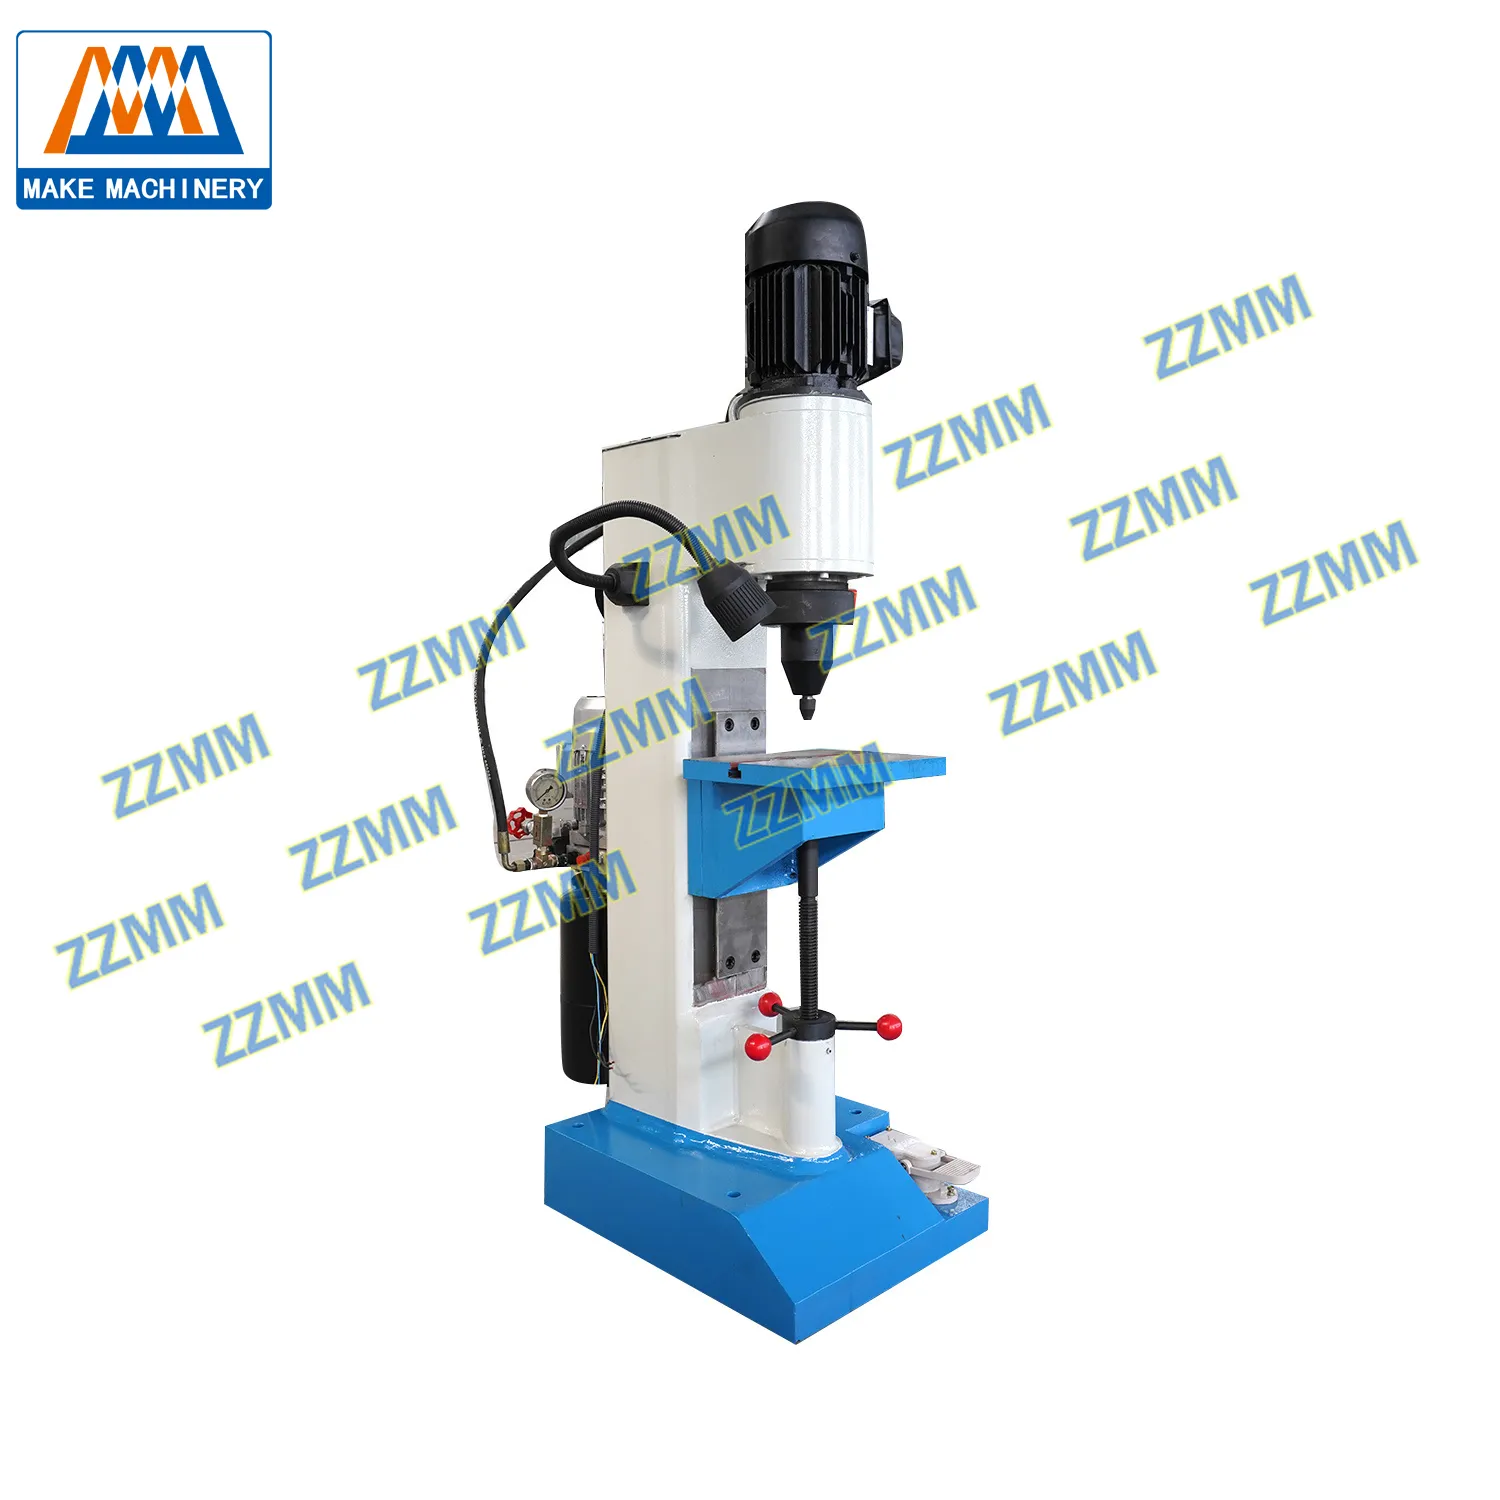 Xm-Series-Spinning-Riveting-Machine-for-Leather-Goods-and-Rivet.jpg